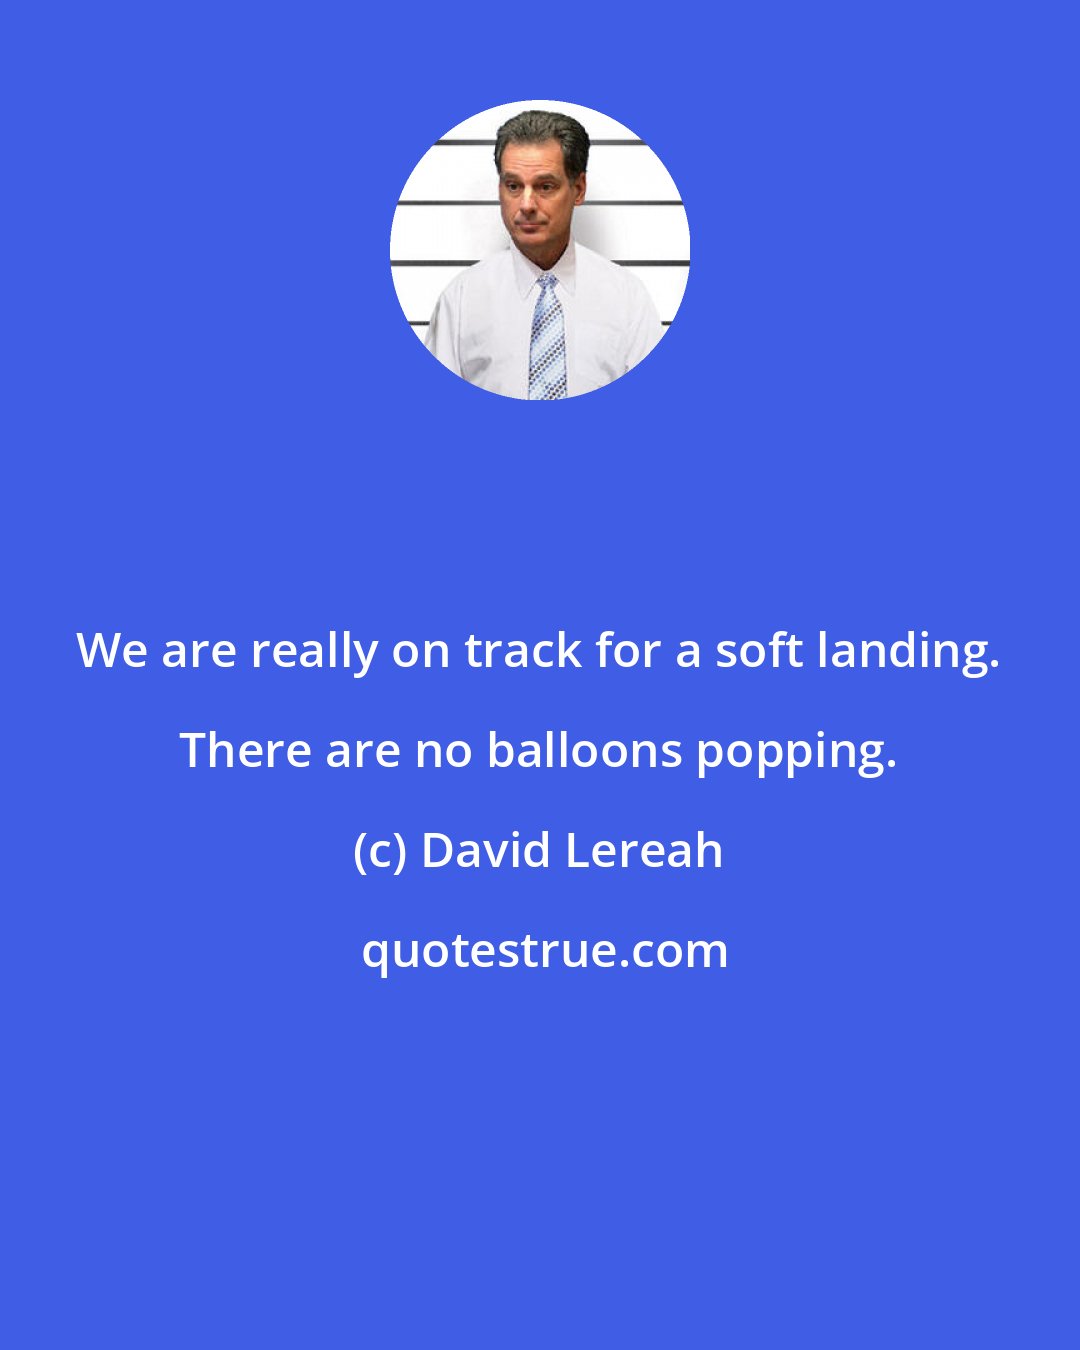 David Lereah: We are really on track for a soft landing. There are no balloons popping.